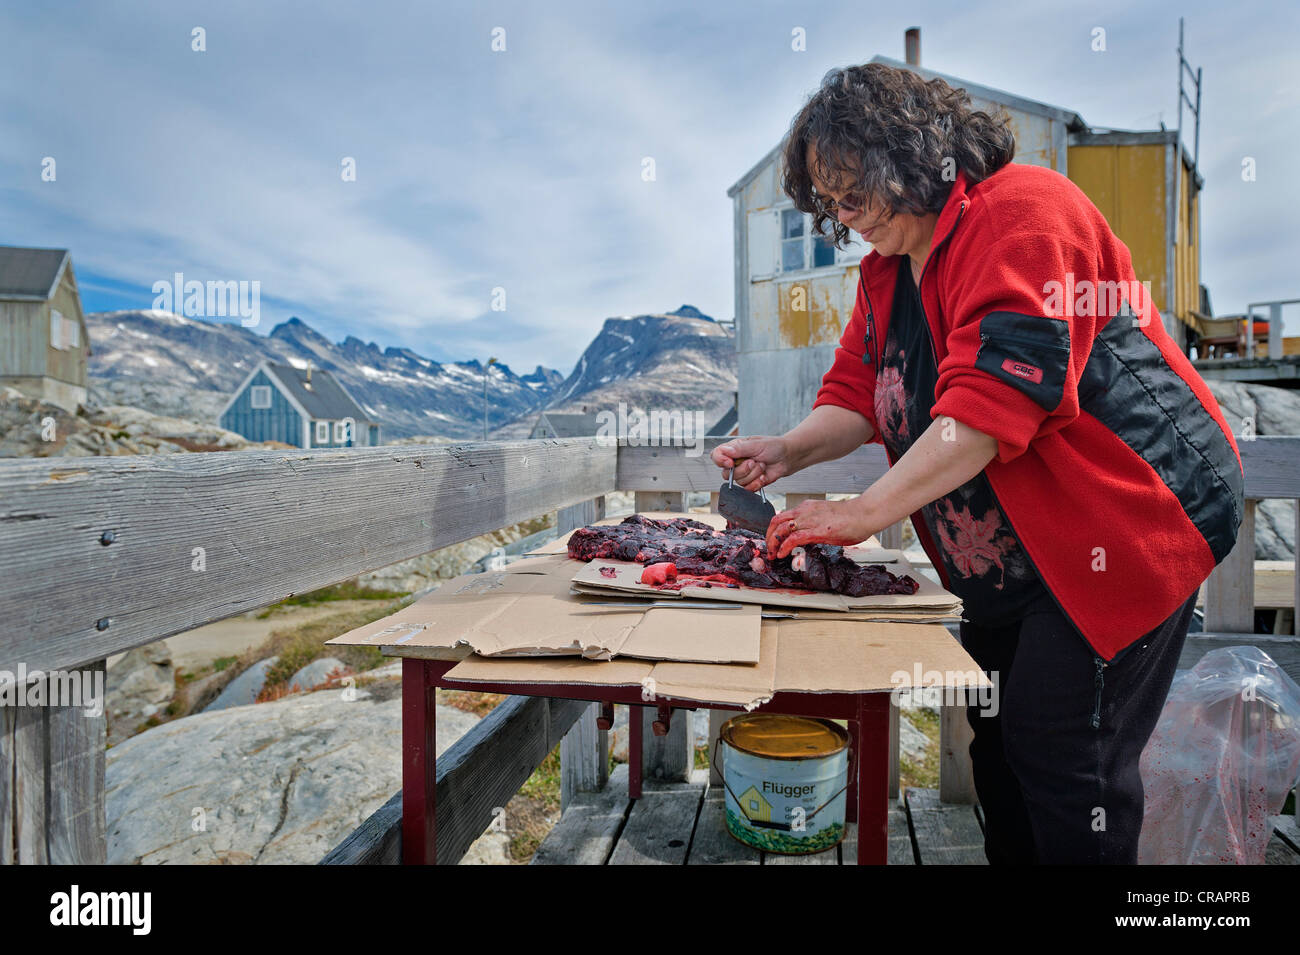 Inuit woman cutting the meat of a seal, Inuit settlement of Tiniteqilaaq, Sermilik Fjord, East Greenland, Greenland Stock Photo